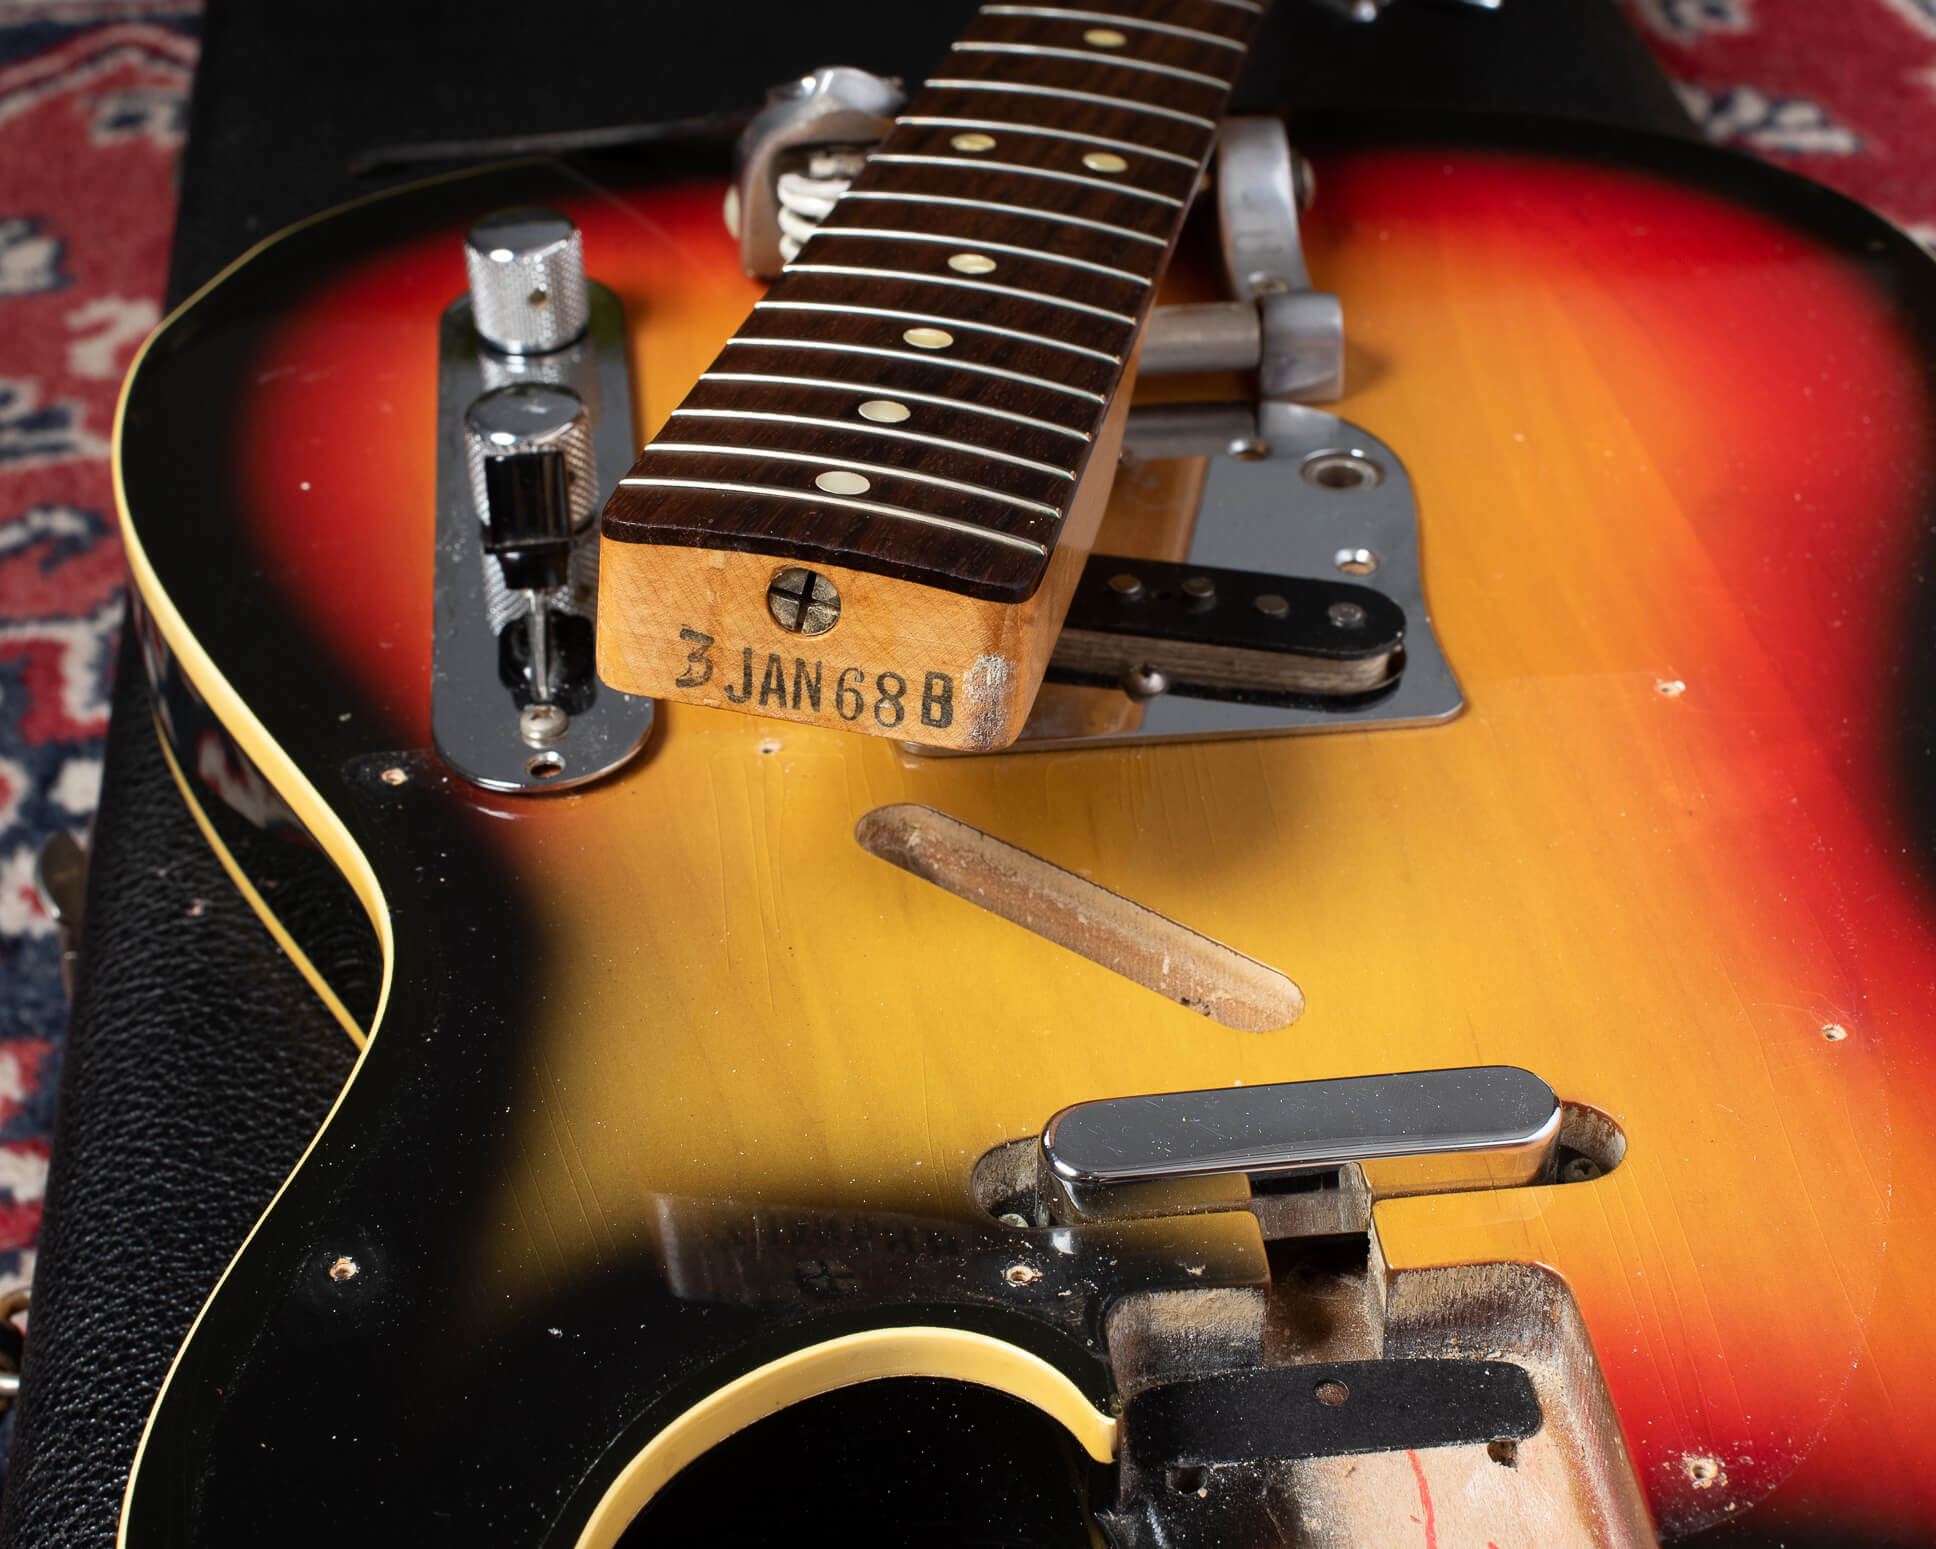 Fender Telecaster year and dating with neck heel ink stamp